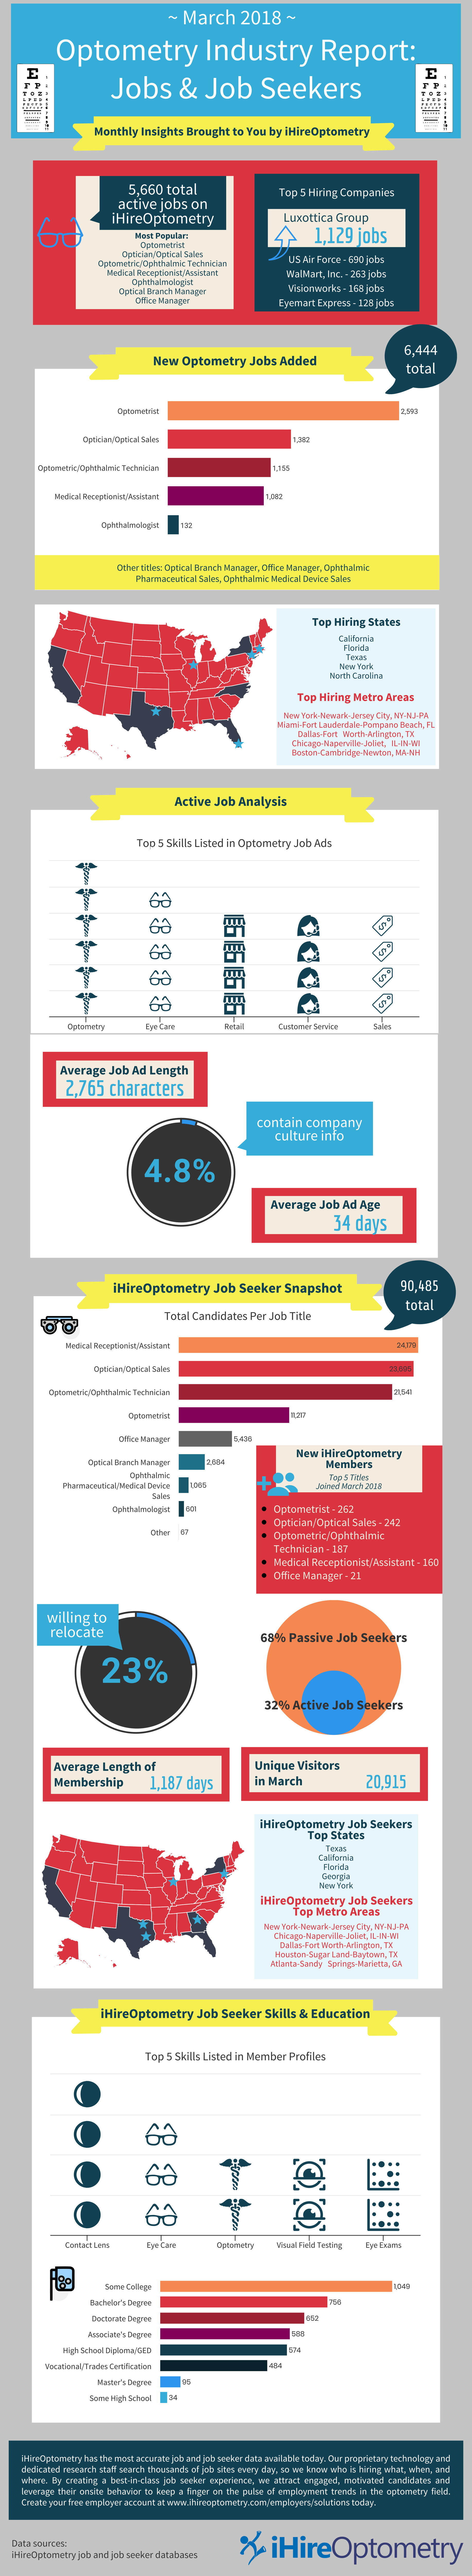 Optometry Industry Report for March 2018